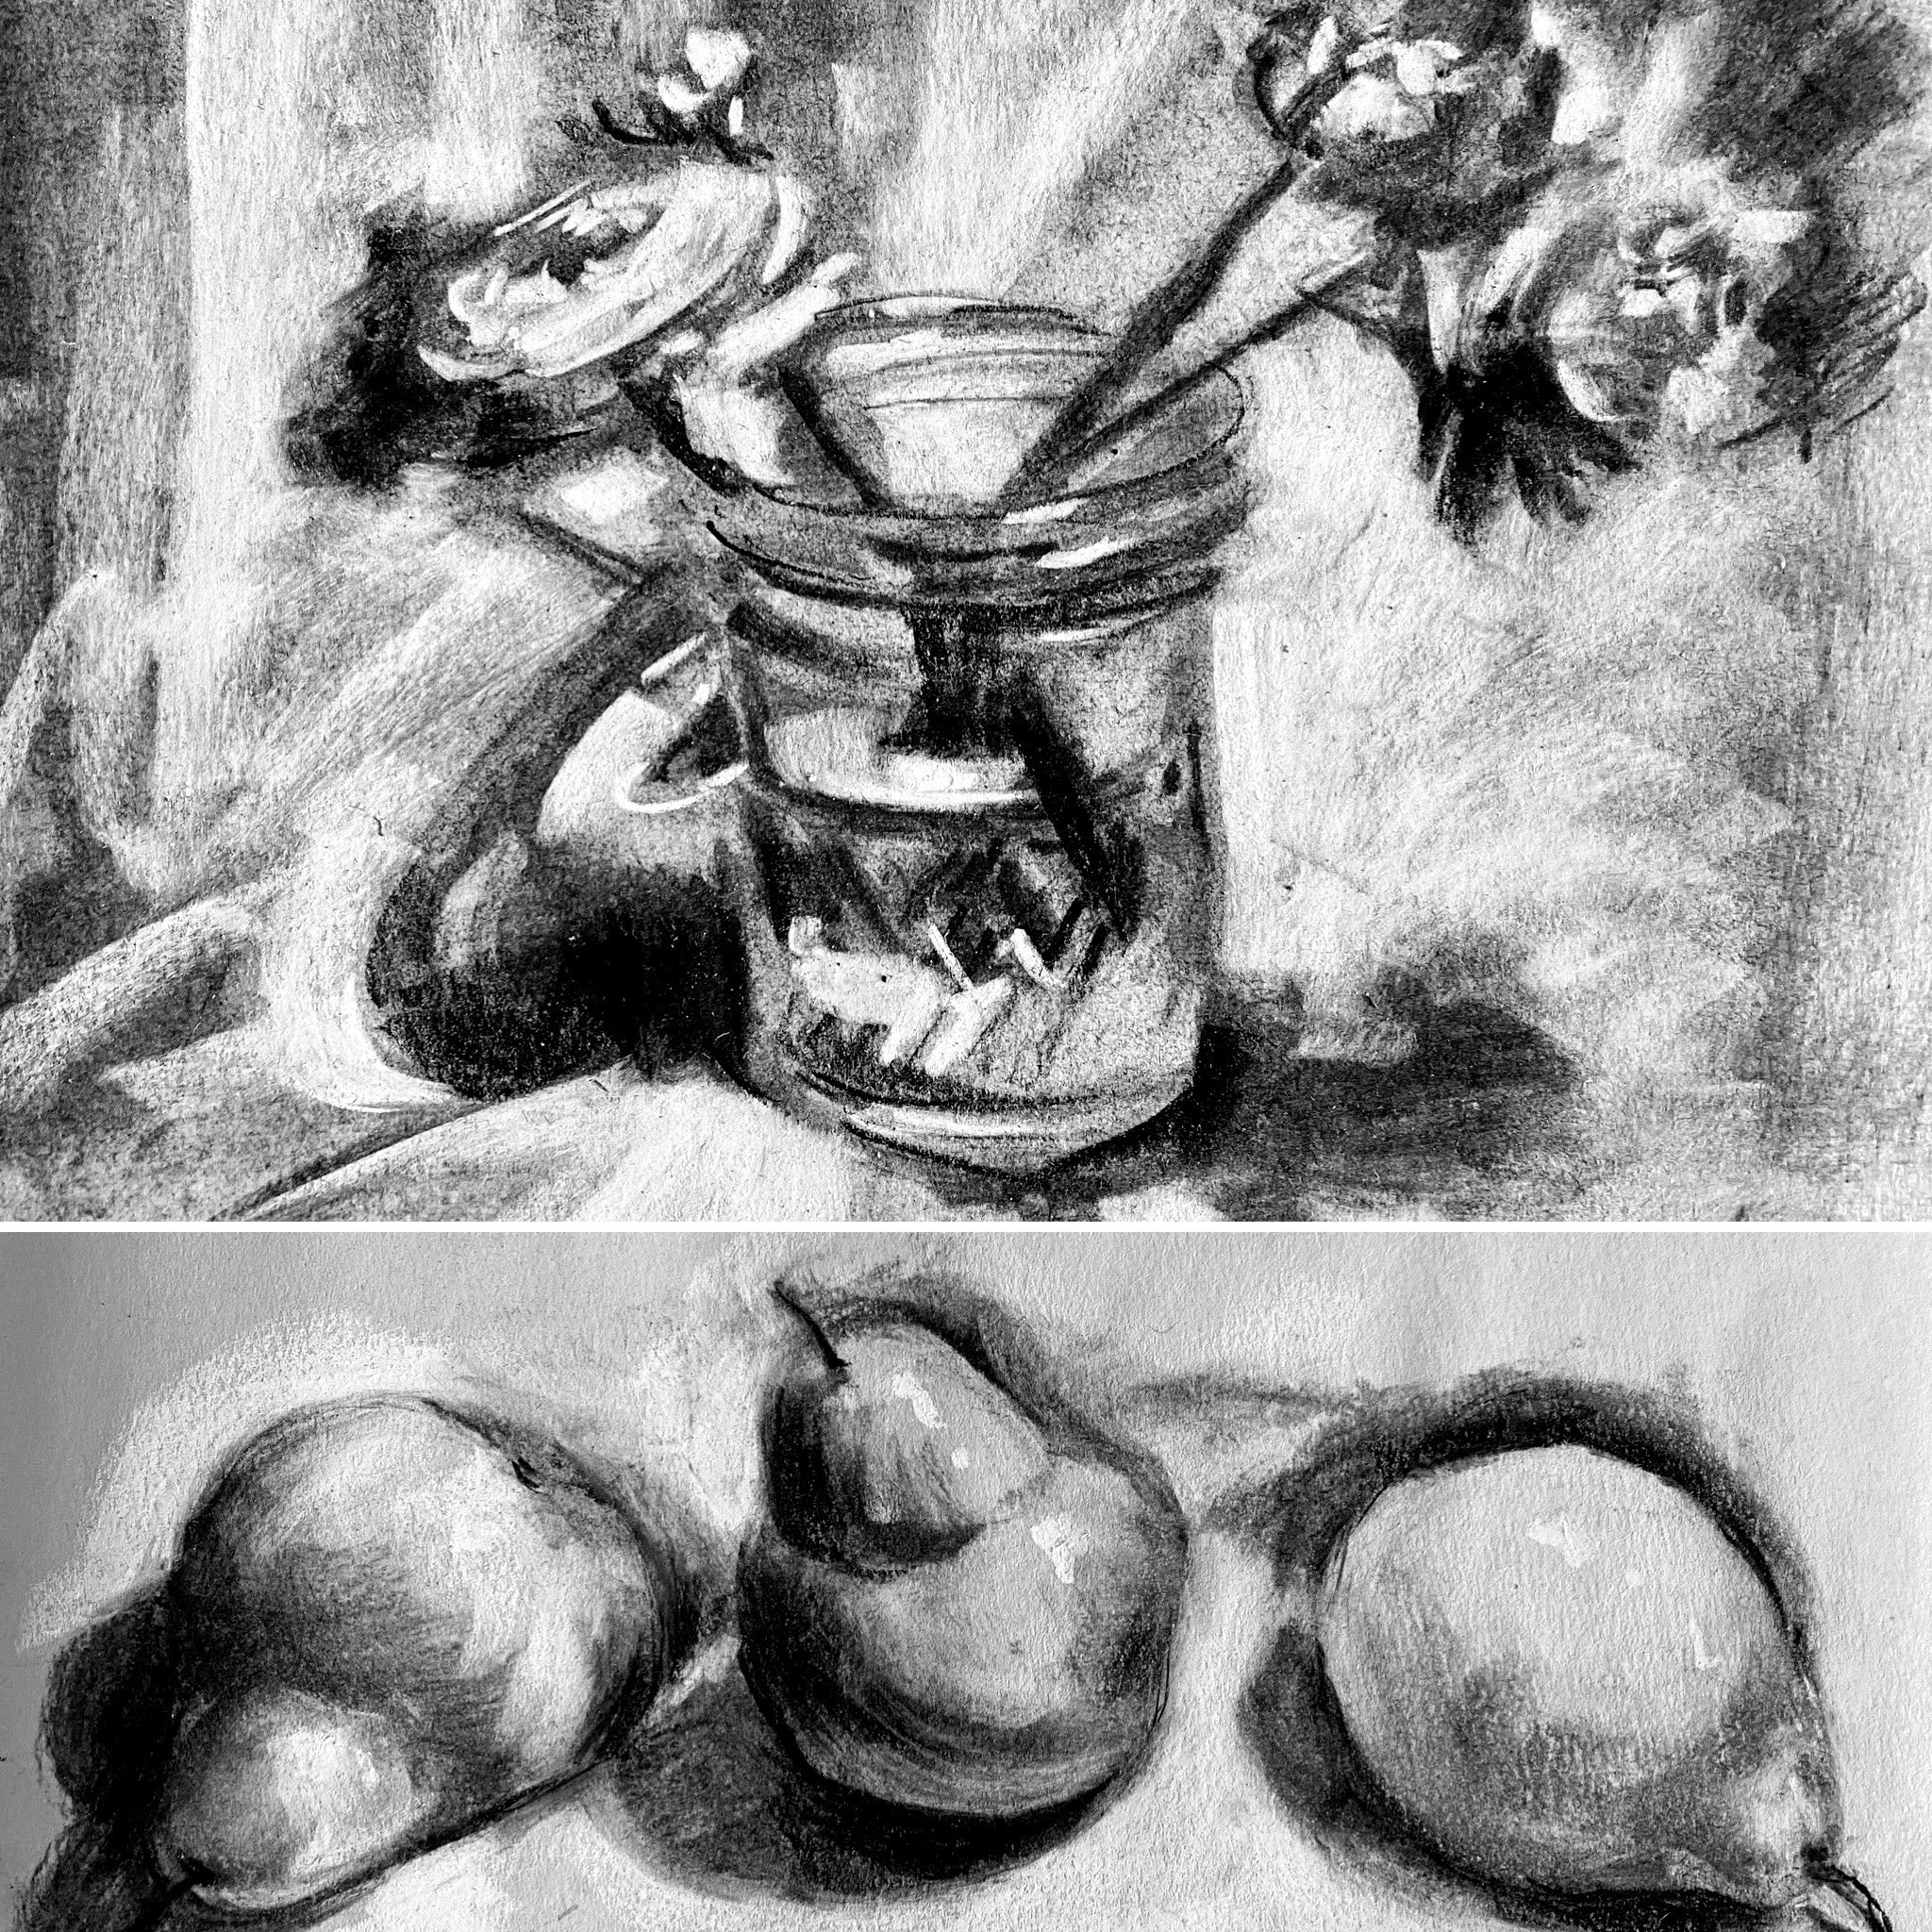 Learn to Draw - Graphite Pencil Drawing Tutorial.